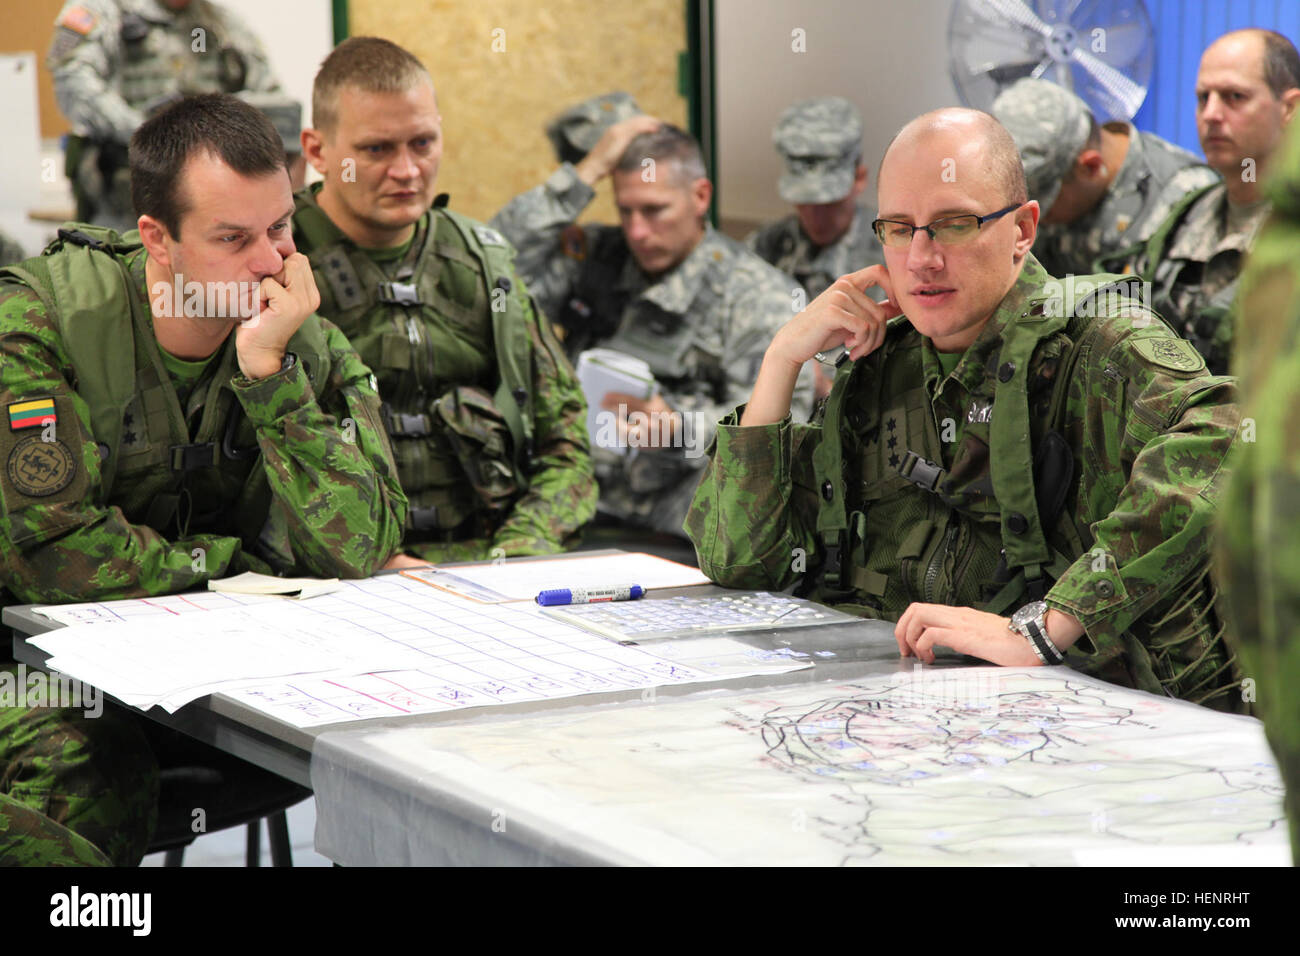 Lithuanian soldiers of 'Iron Wolf' Mechanized Infantry Brigade study a map while working to plan a mission during training exercise Saber Junction 2014 at the Joint Multinational Readiness Center in Hohenfels, Germany, Sept. 6, 2014. Saber Junction 2014 prepares U.S., NATO allies and European security partners to conduct unified land operations through the simultaneous combination of offensive, defensive and stability operations appropriate to the mission and the environment.  More information about Saber Junction 2014 can be found at http://www.eur.army.mil/SaberJunction/ (U.S. Army photo by  Stock Photo